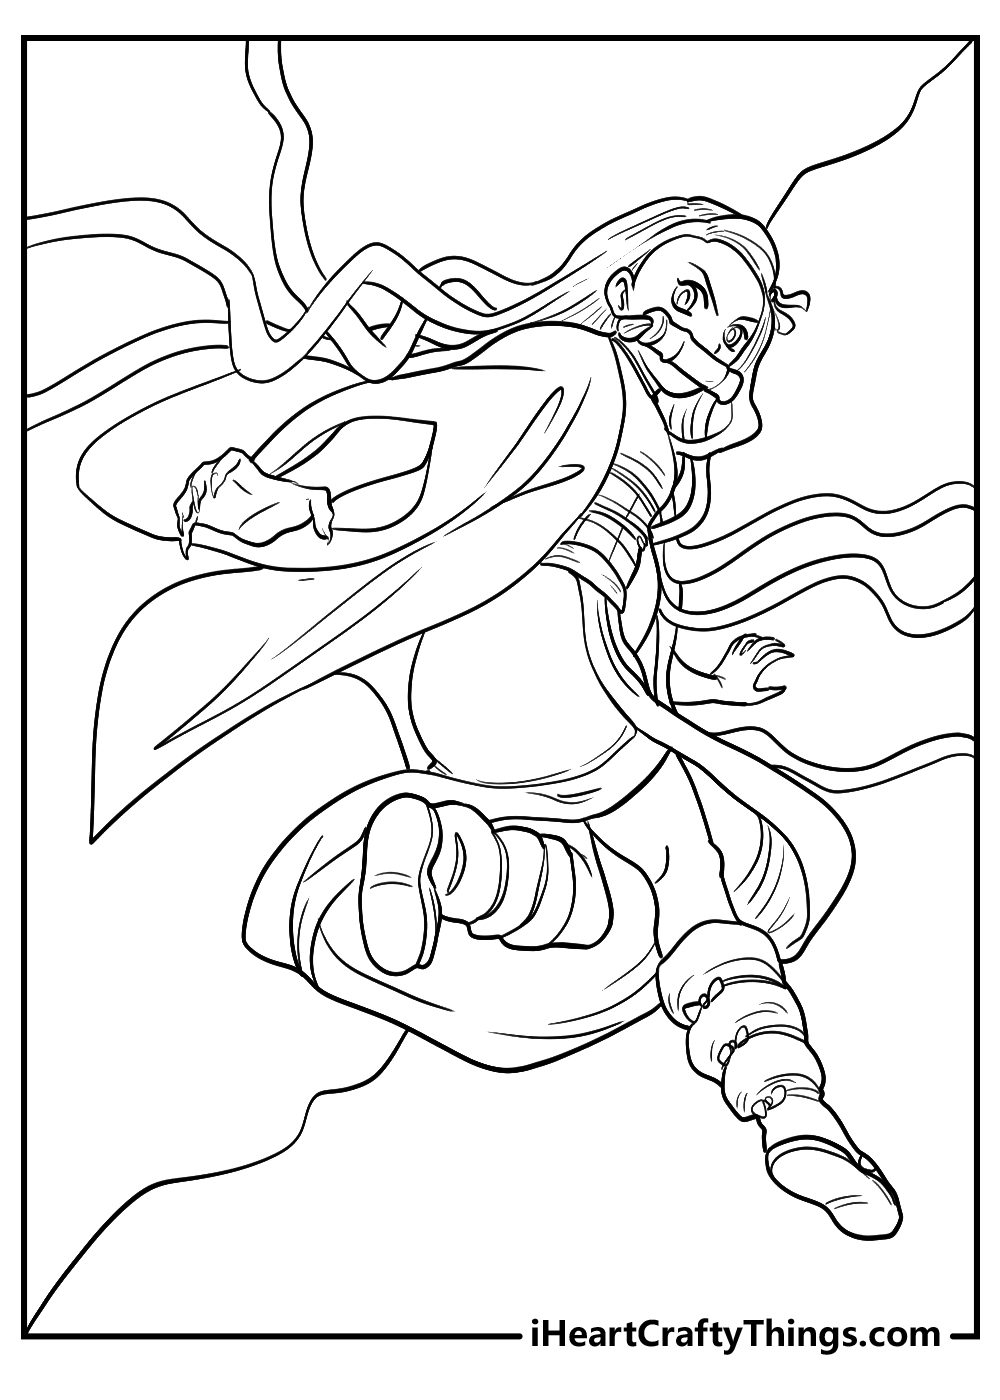 original nezuko drawing coloring pages